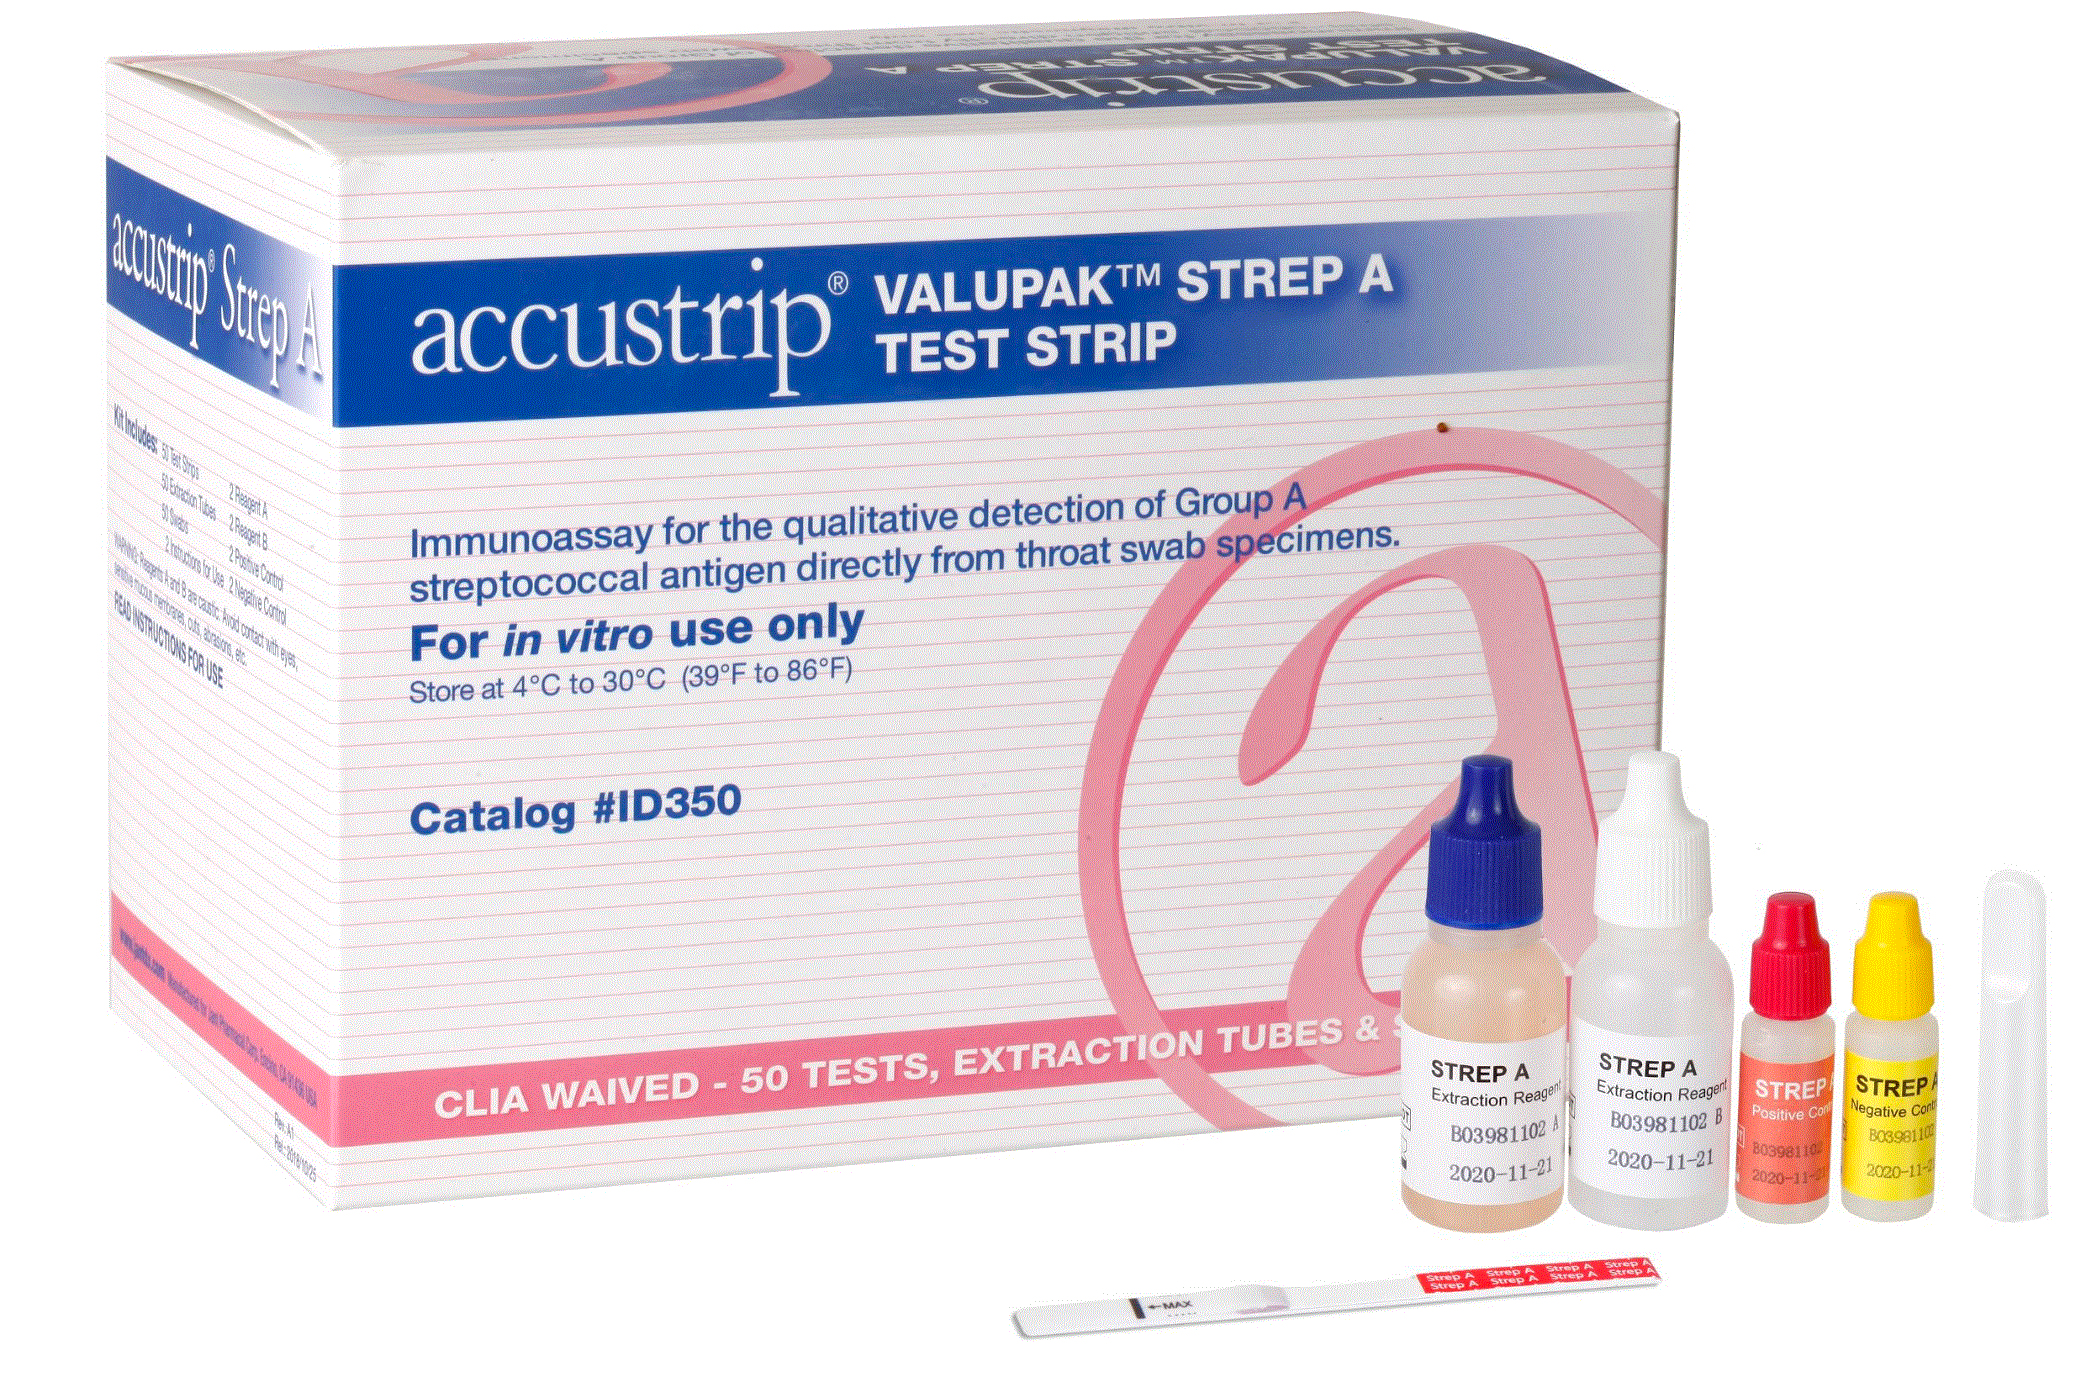 Accutest ValuPak Strep A Test Strip - PROMO $57.00/Kit of 50 Jant Pharmacal ID350